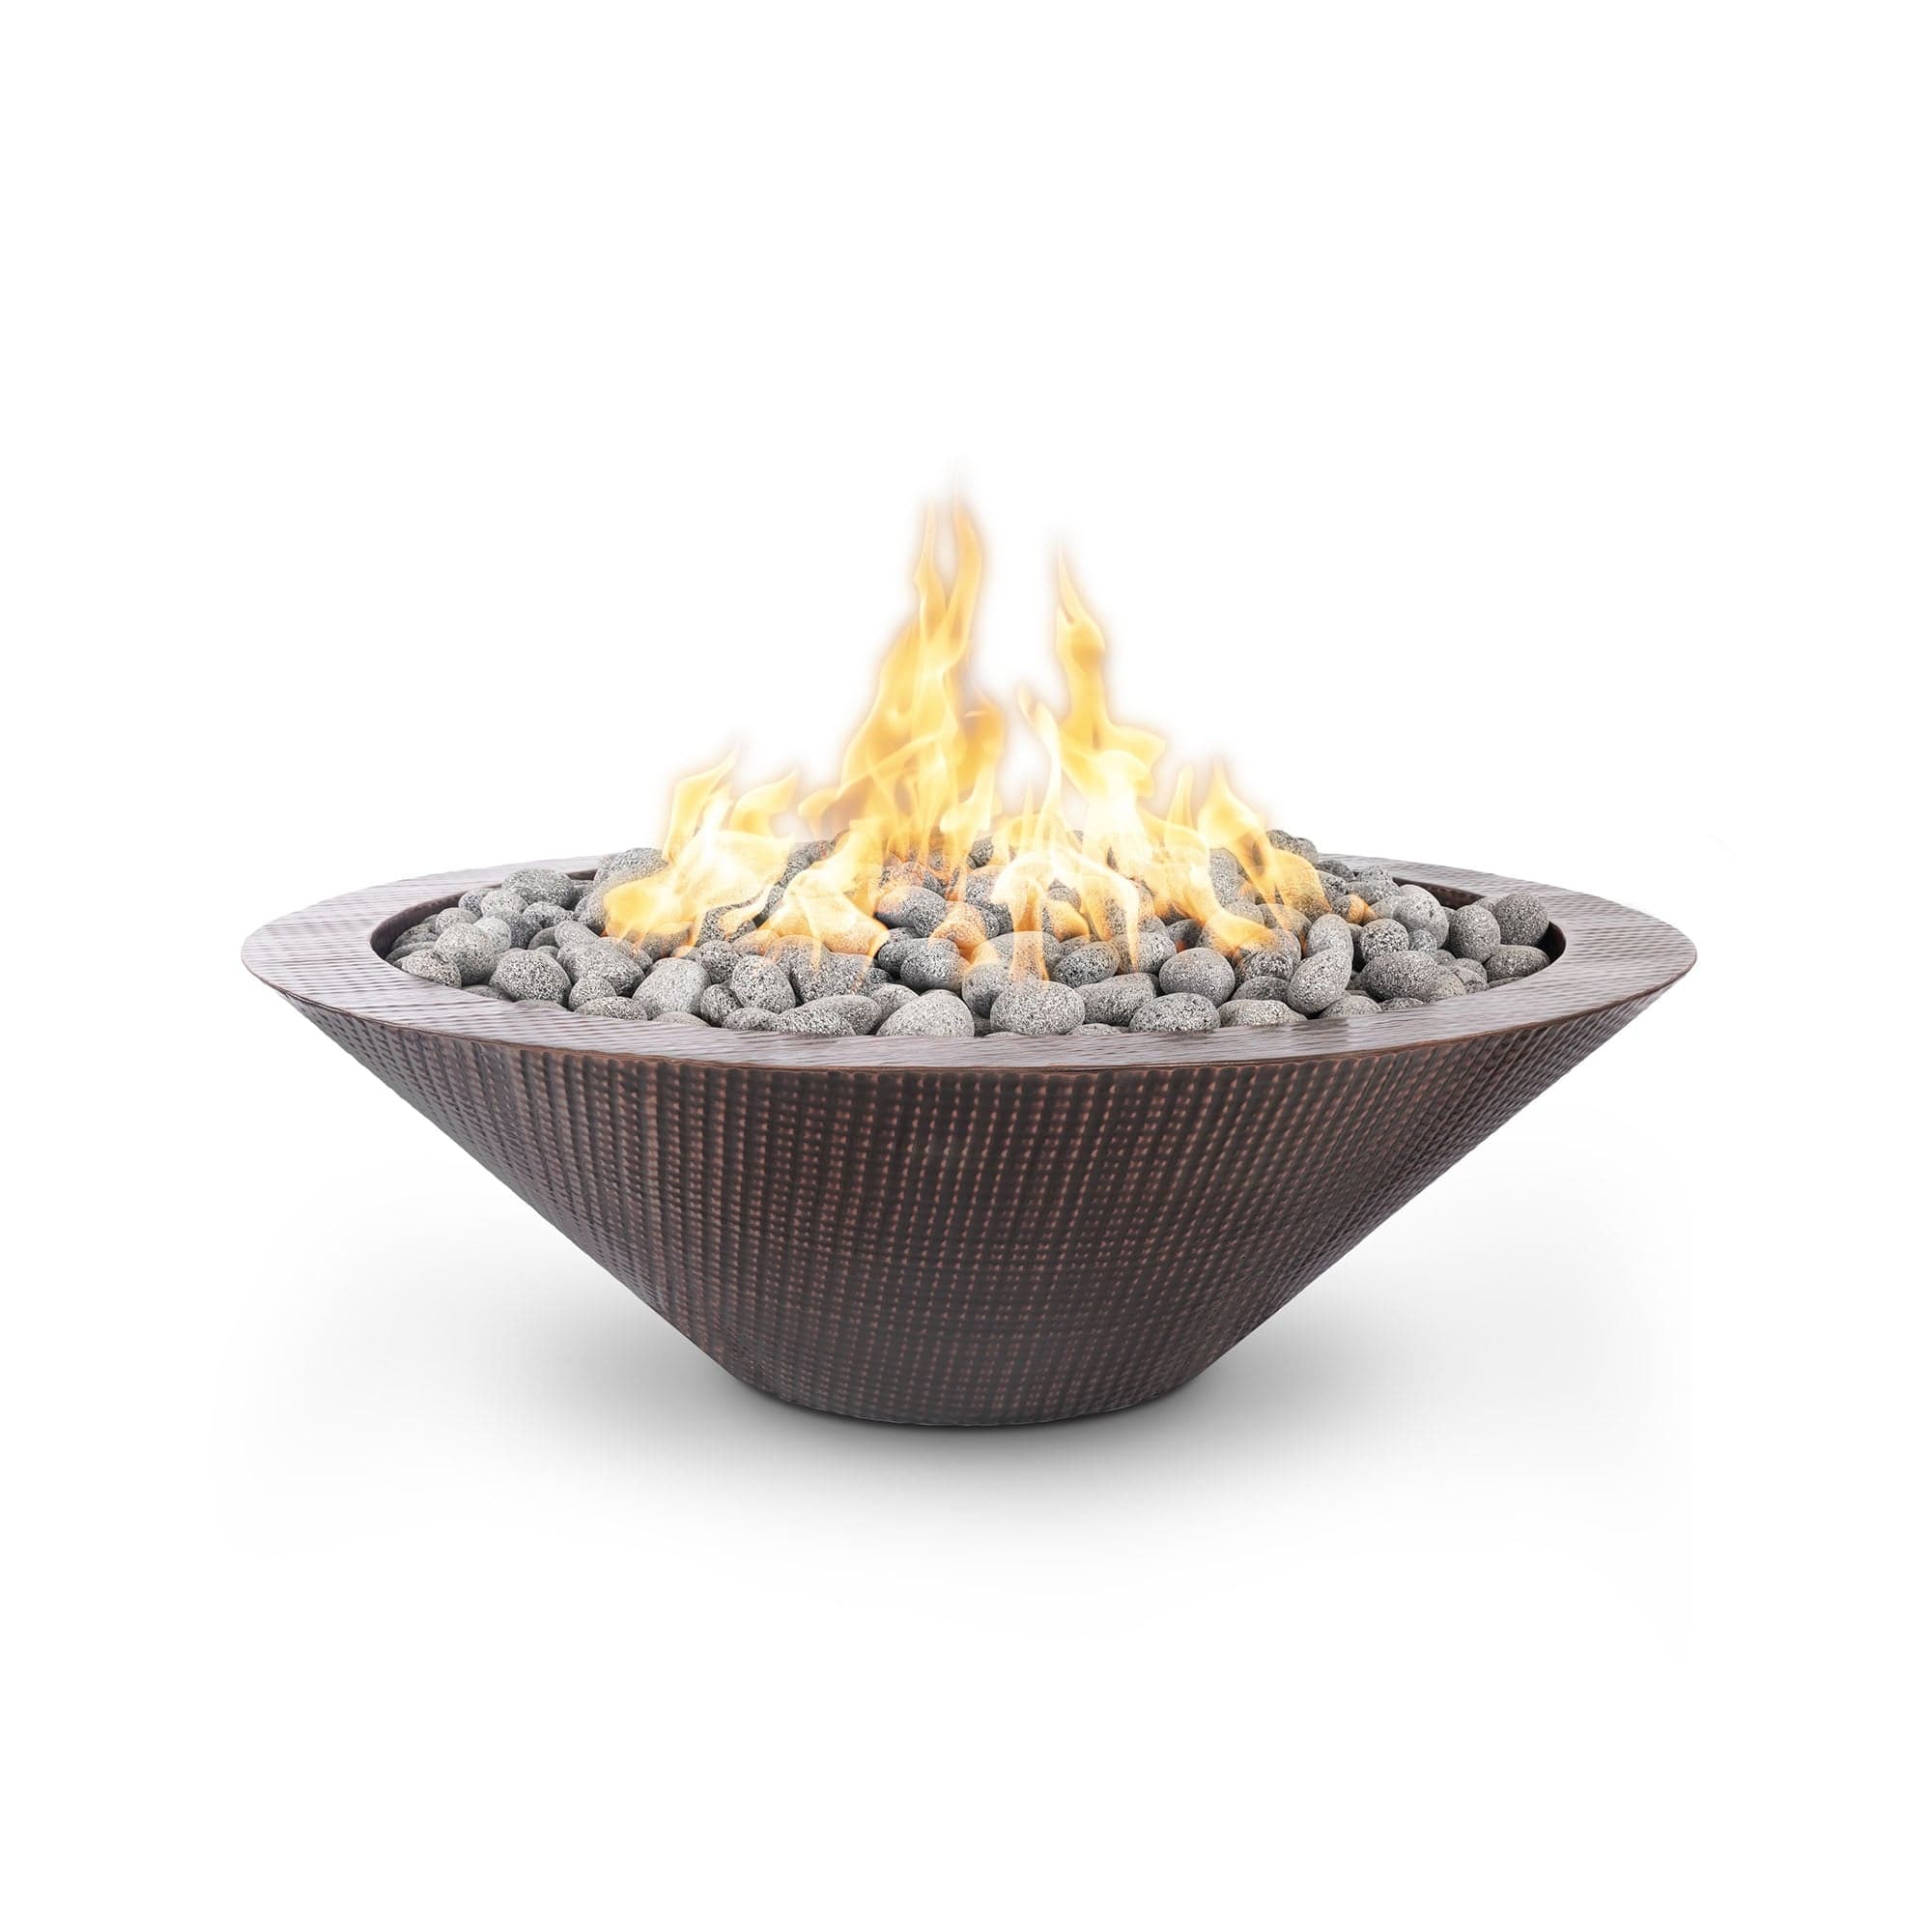 The Outdoor Plus Fire Features The Outdoor Plus 48" Round Cazo Copper Narrow Ledge Fire Pit / OPT-RHC48, OPT-RHC48FSML, OPT-RHC48FSEN, OPT-RHC48E12V, OPT-RHC48EKIT